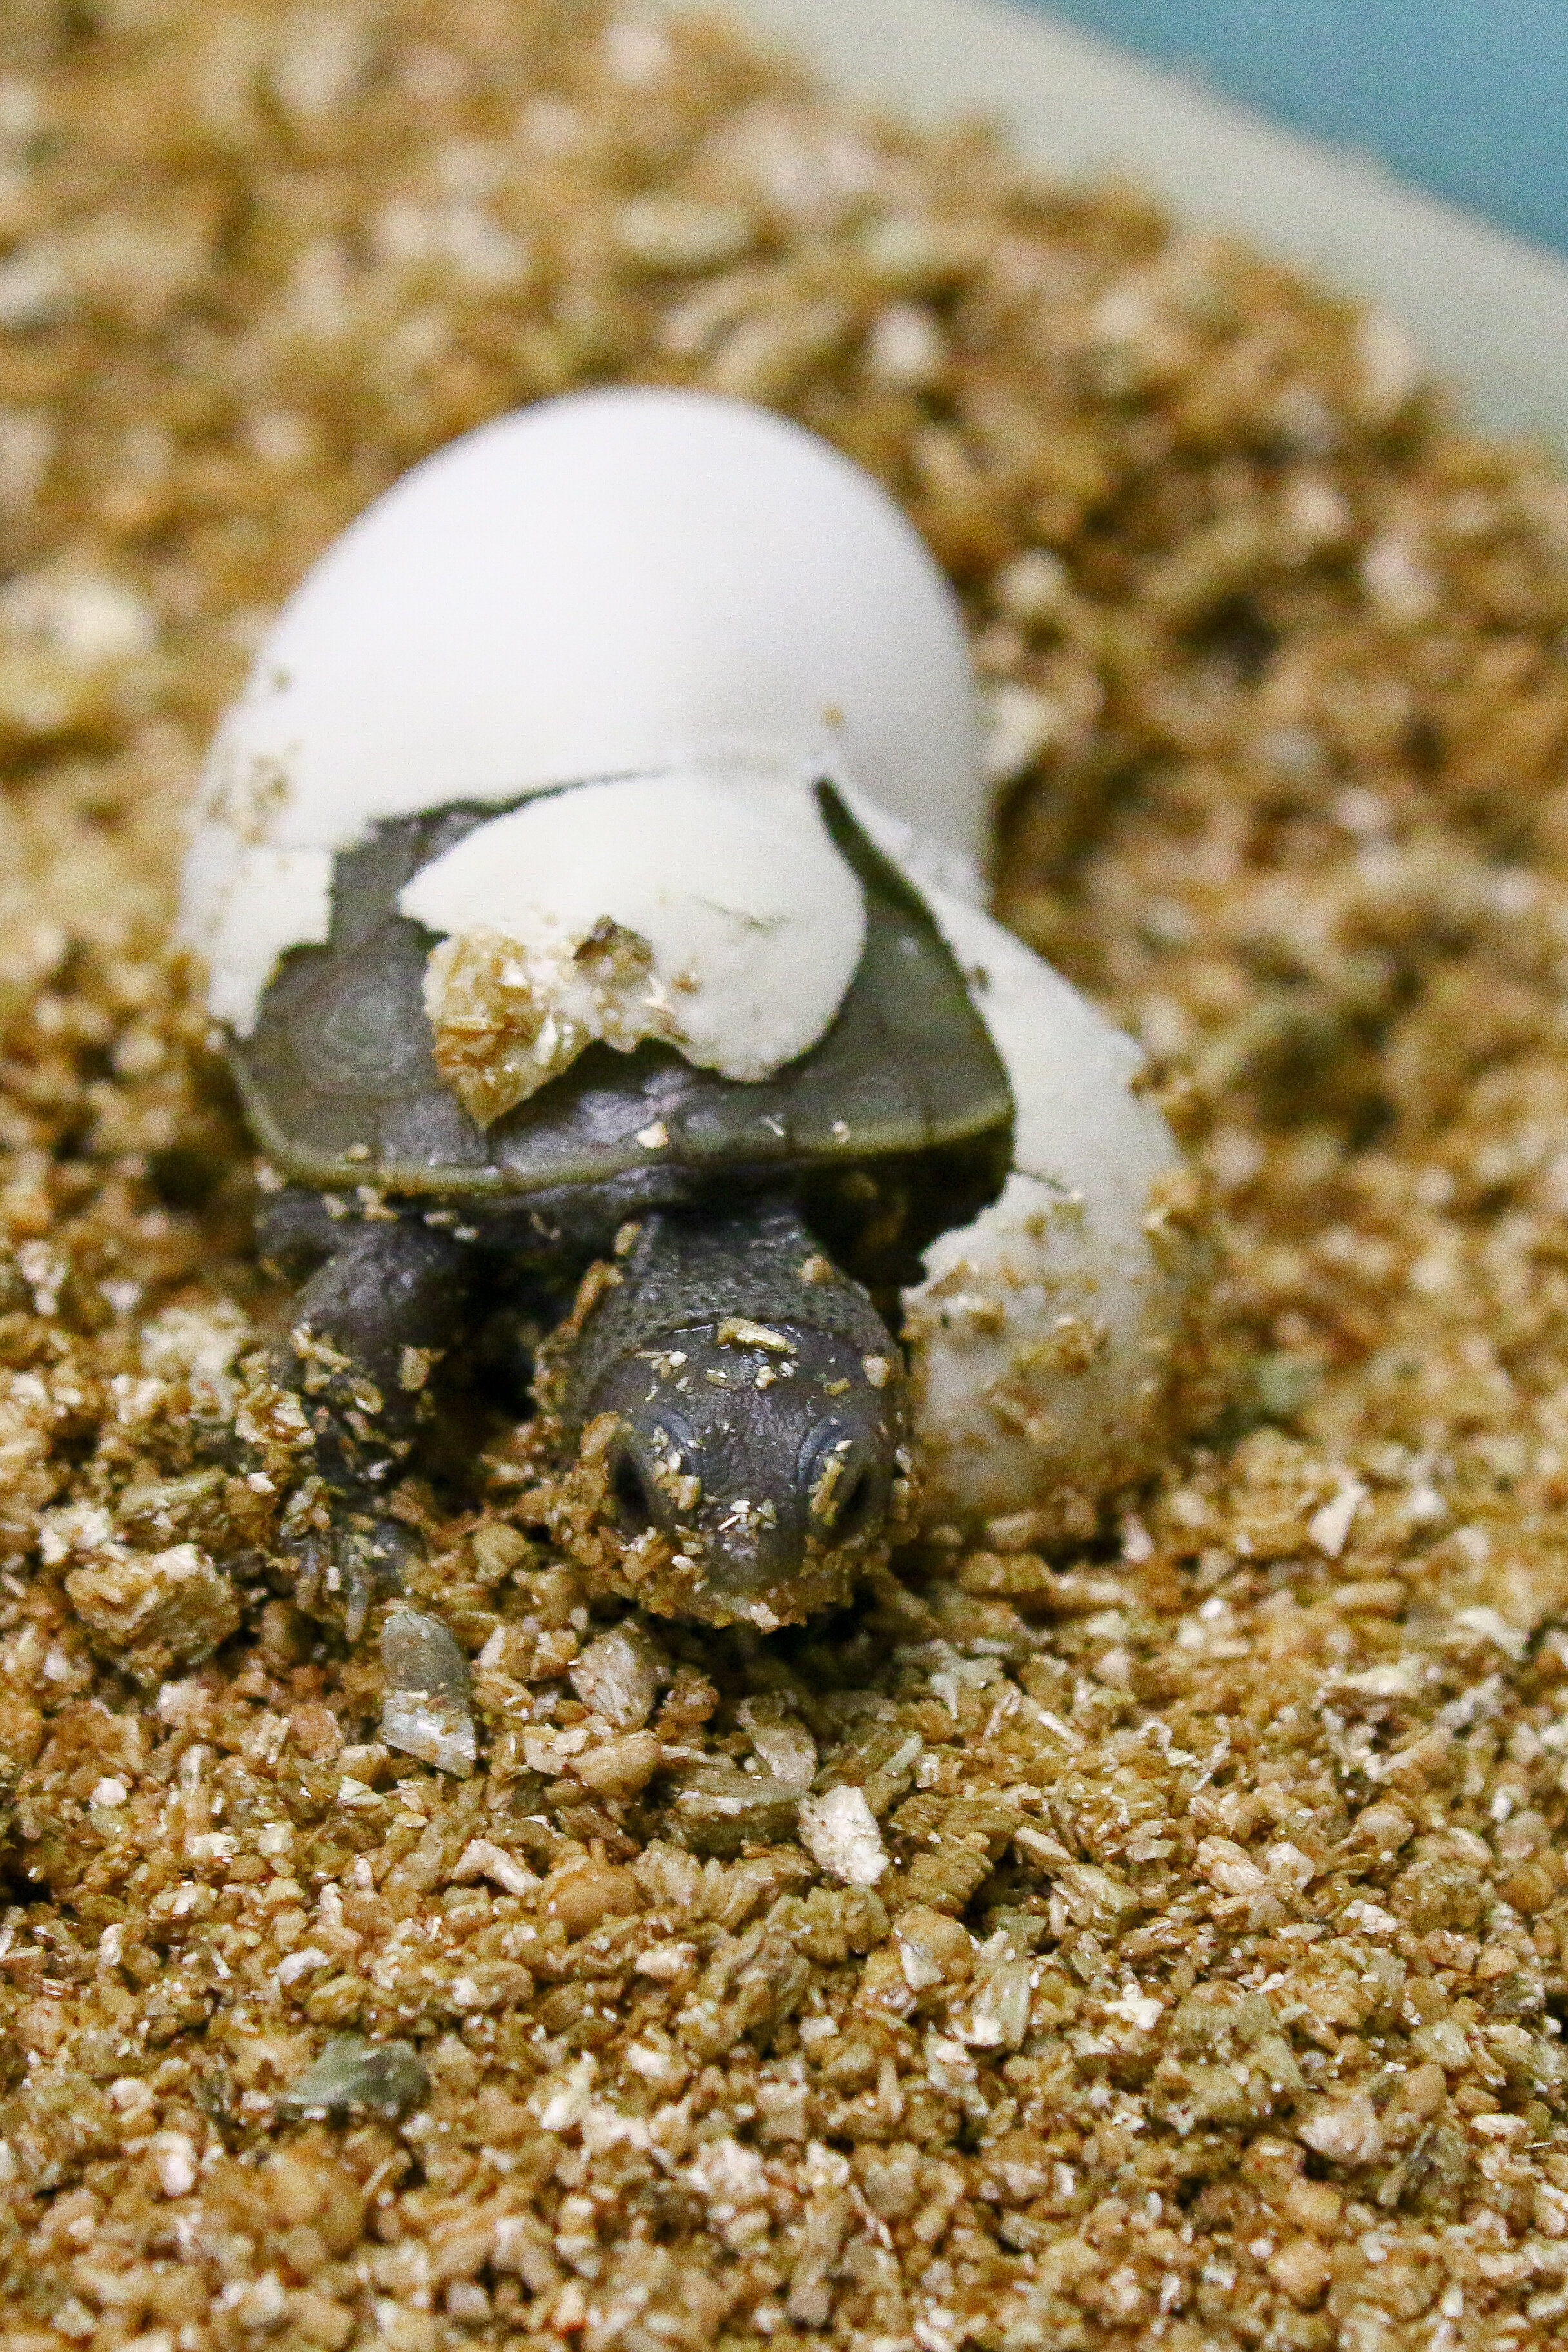 Diamondback terrapin hatching at The Wetlands Institute from egg recovered from a road-killed mother.